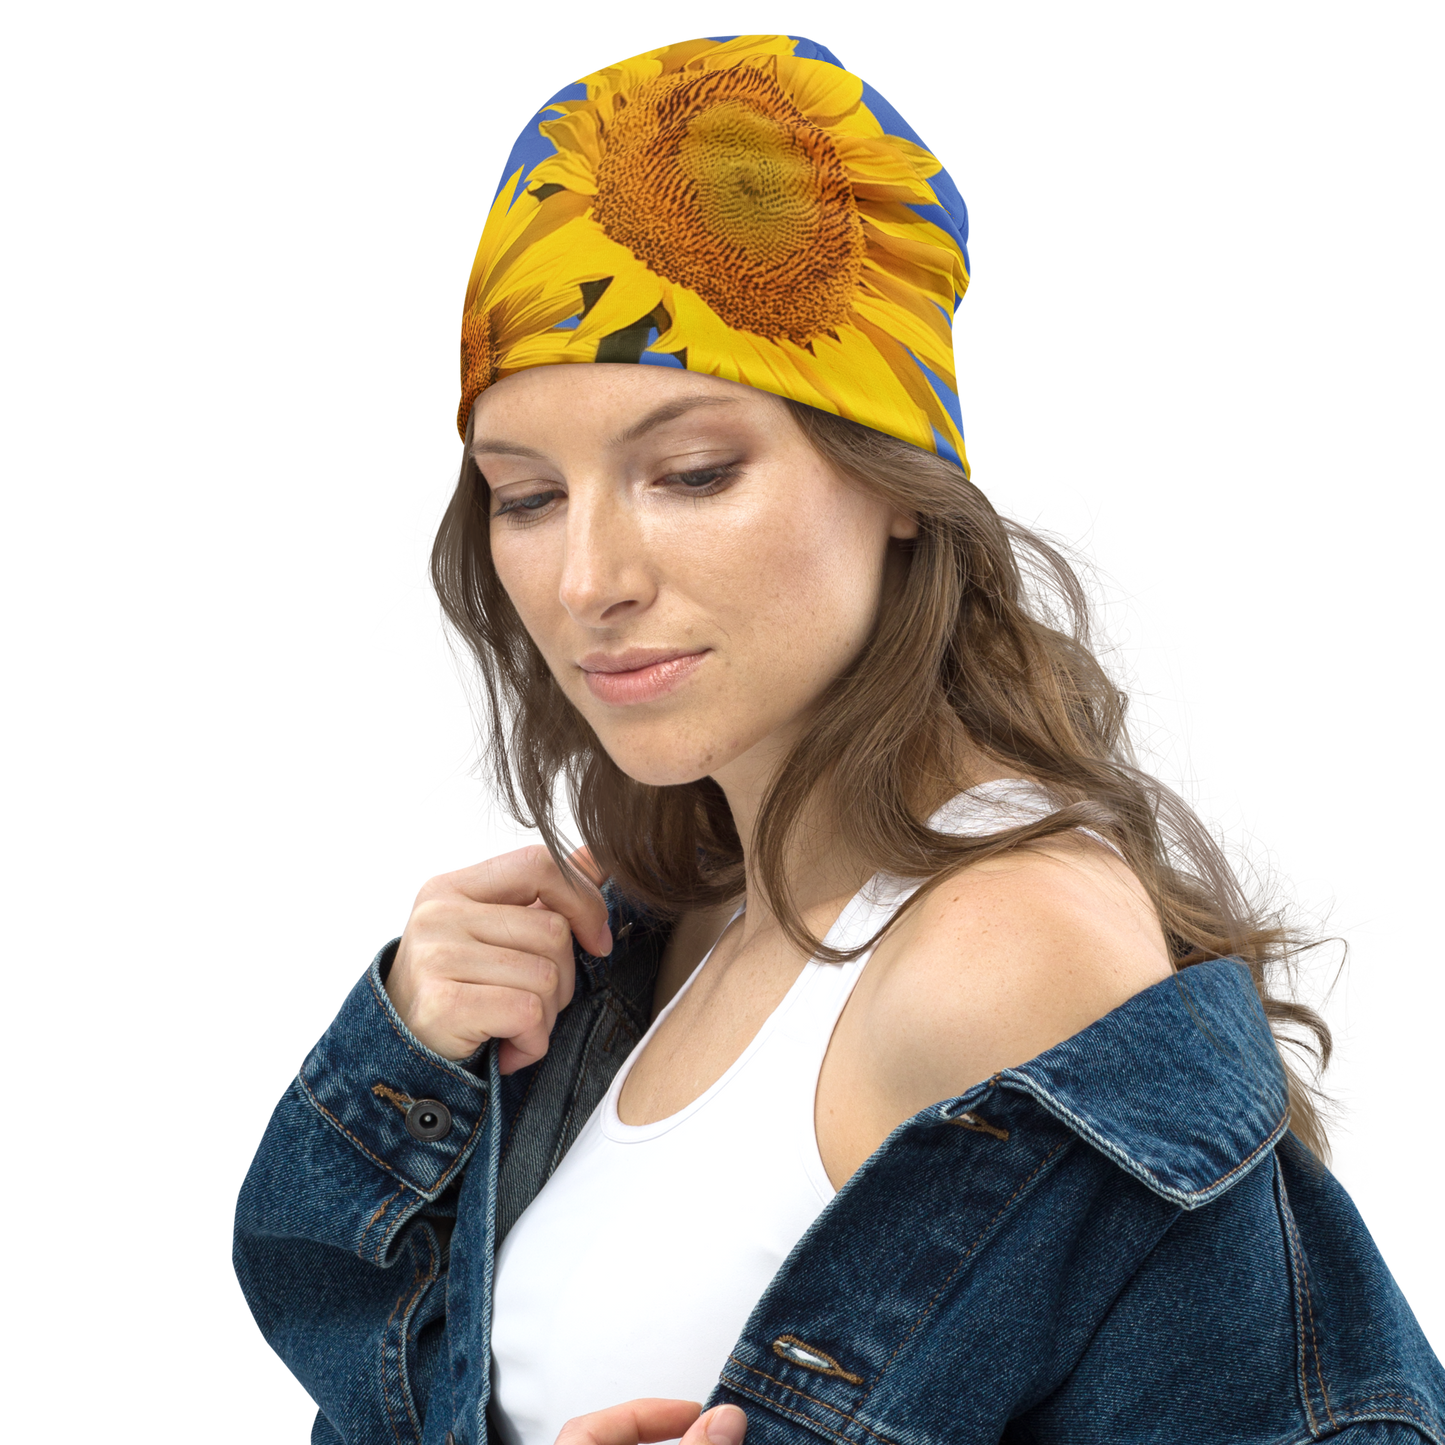 The FLOWER LOVE Collection - "Sunflower Sisters" Design Beanie - Lightweight, Cute Chemo Hat